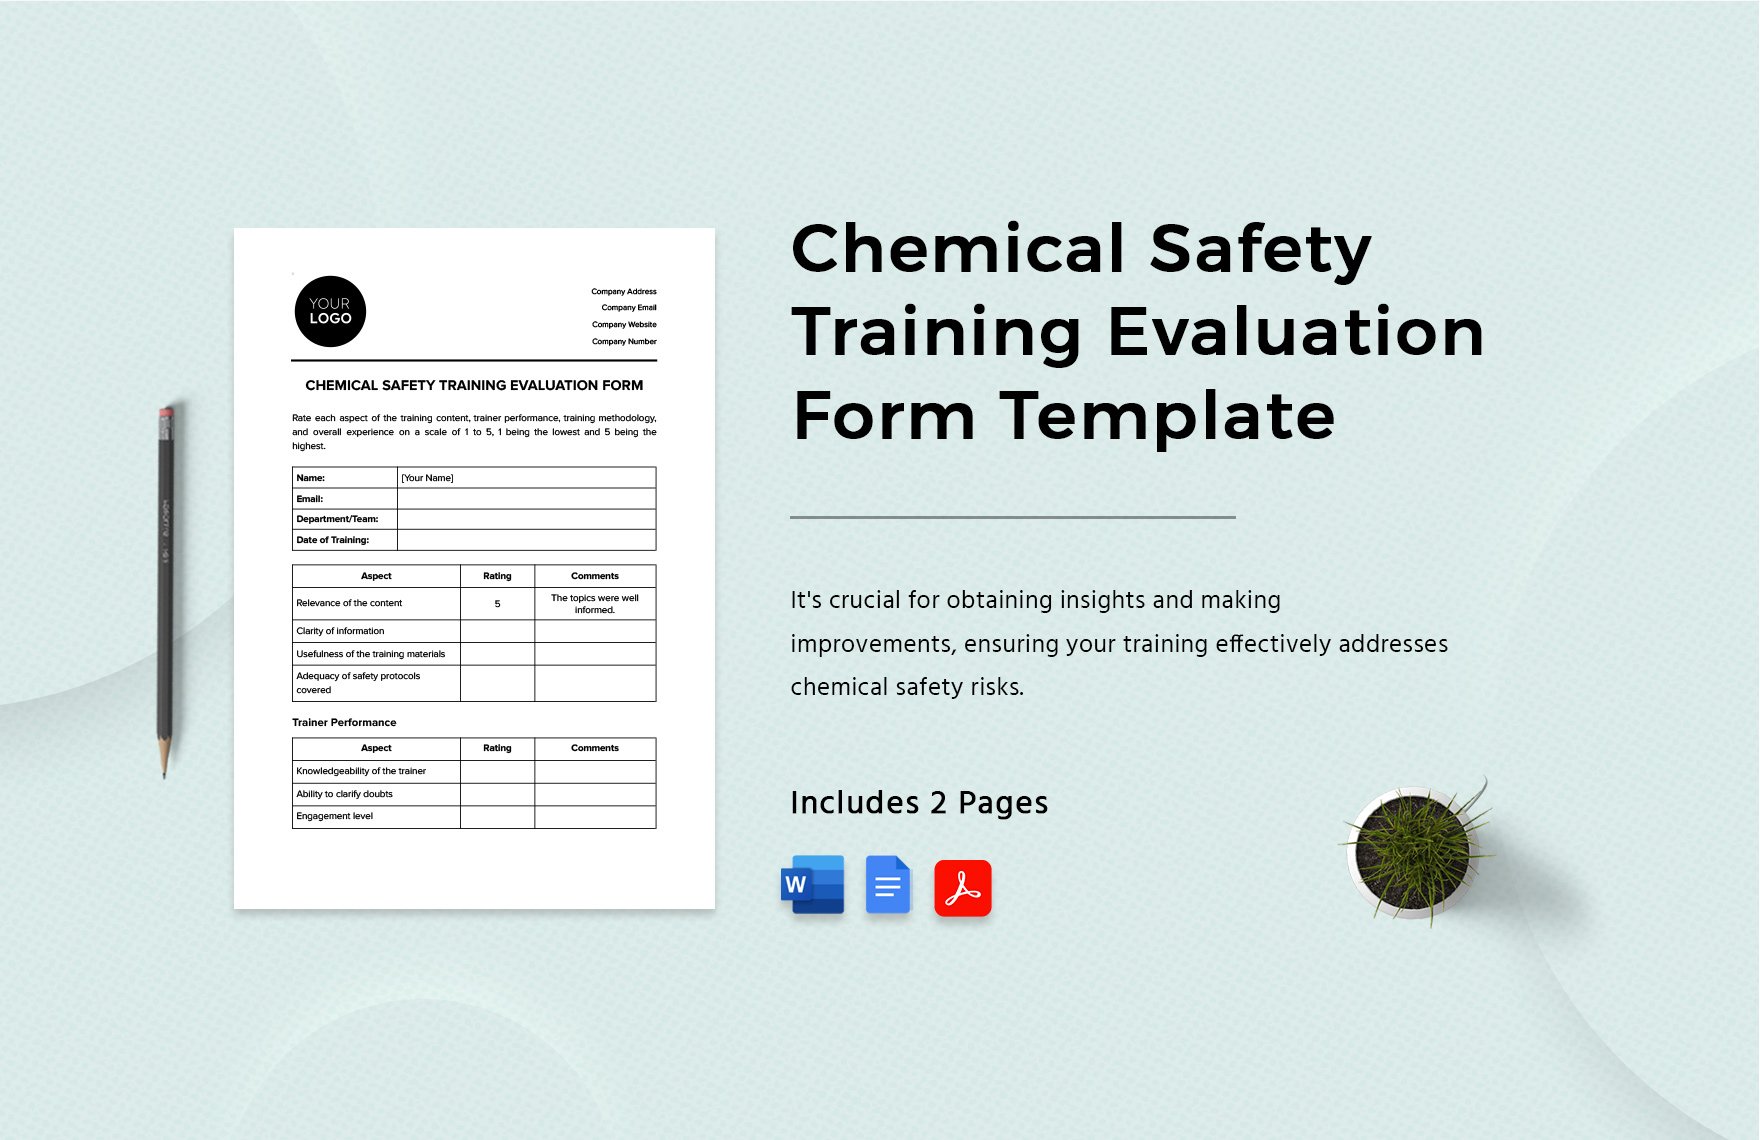 Chemical Safety Training Evaluation Form Template in Word, Google Docs, PDF